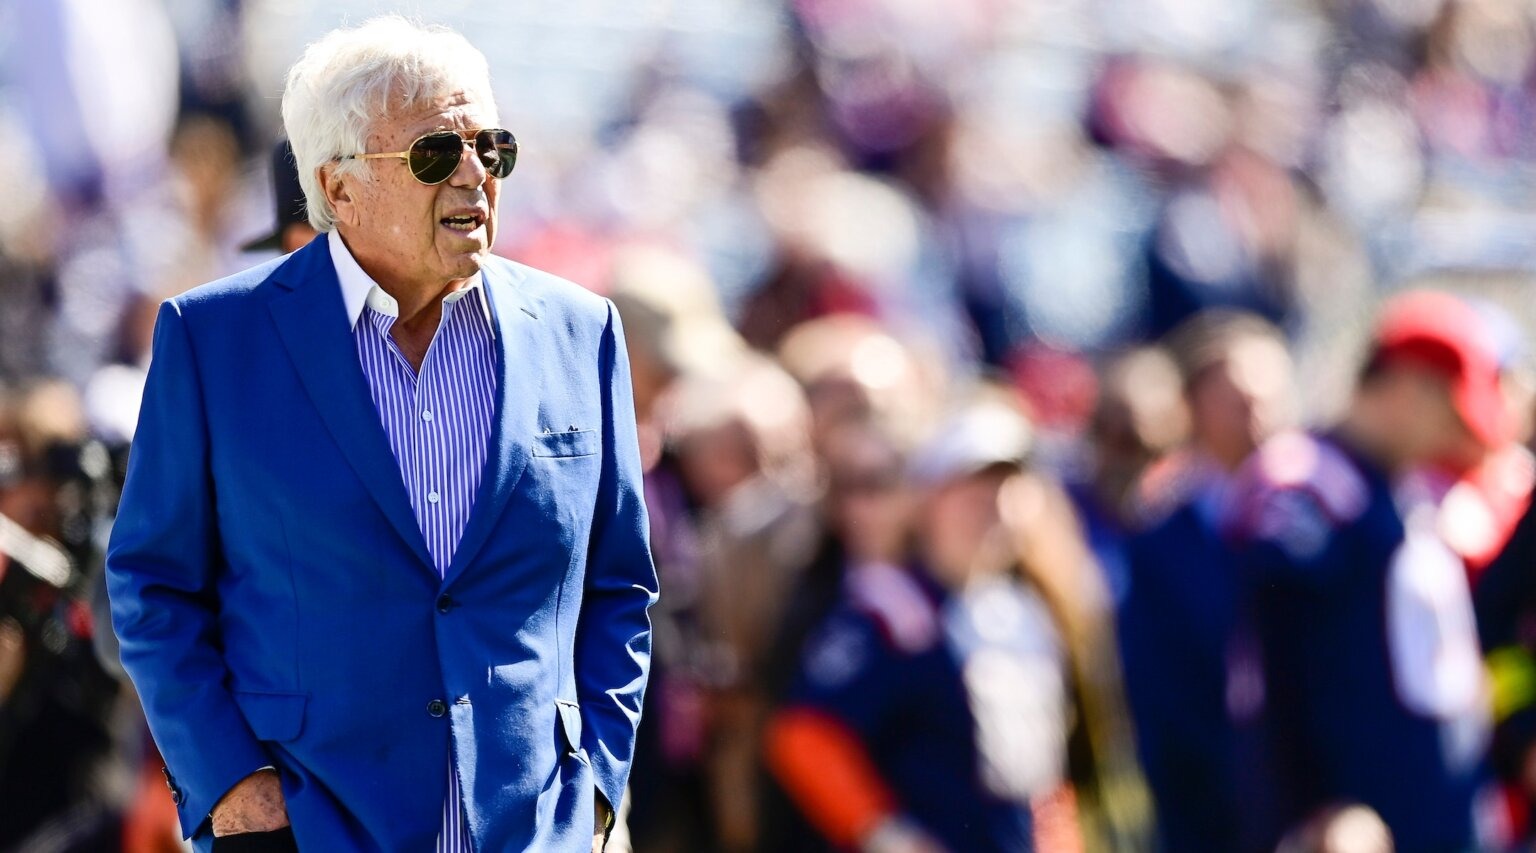 Robert Kraft is a Jewish philanthropist and owner of the New England Patriots.